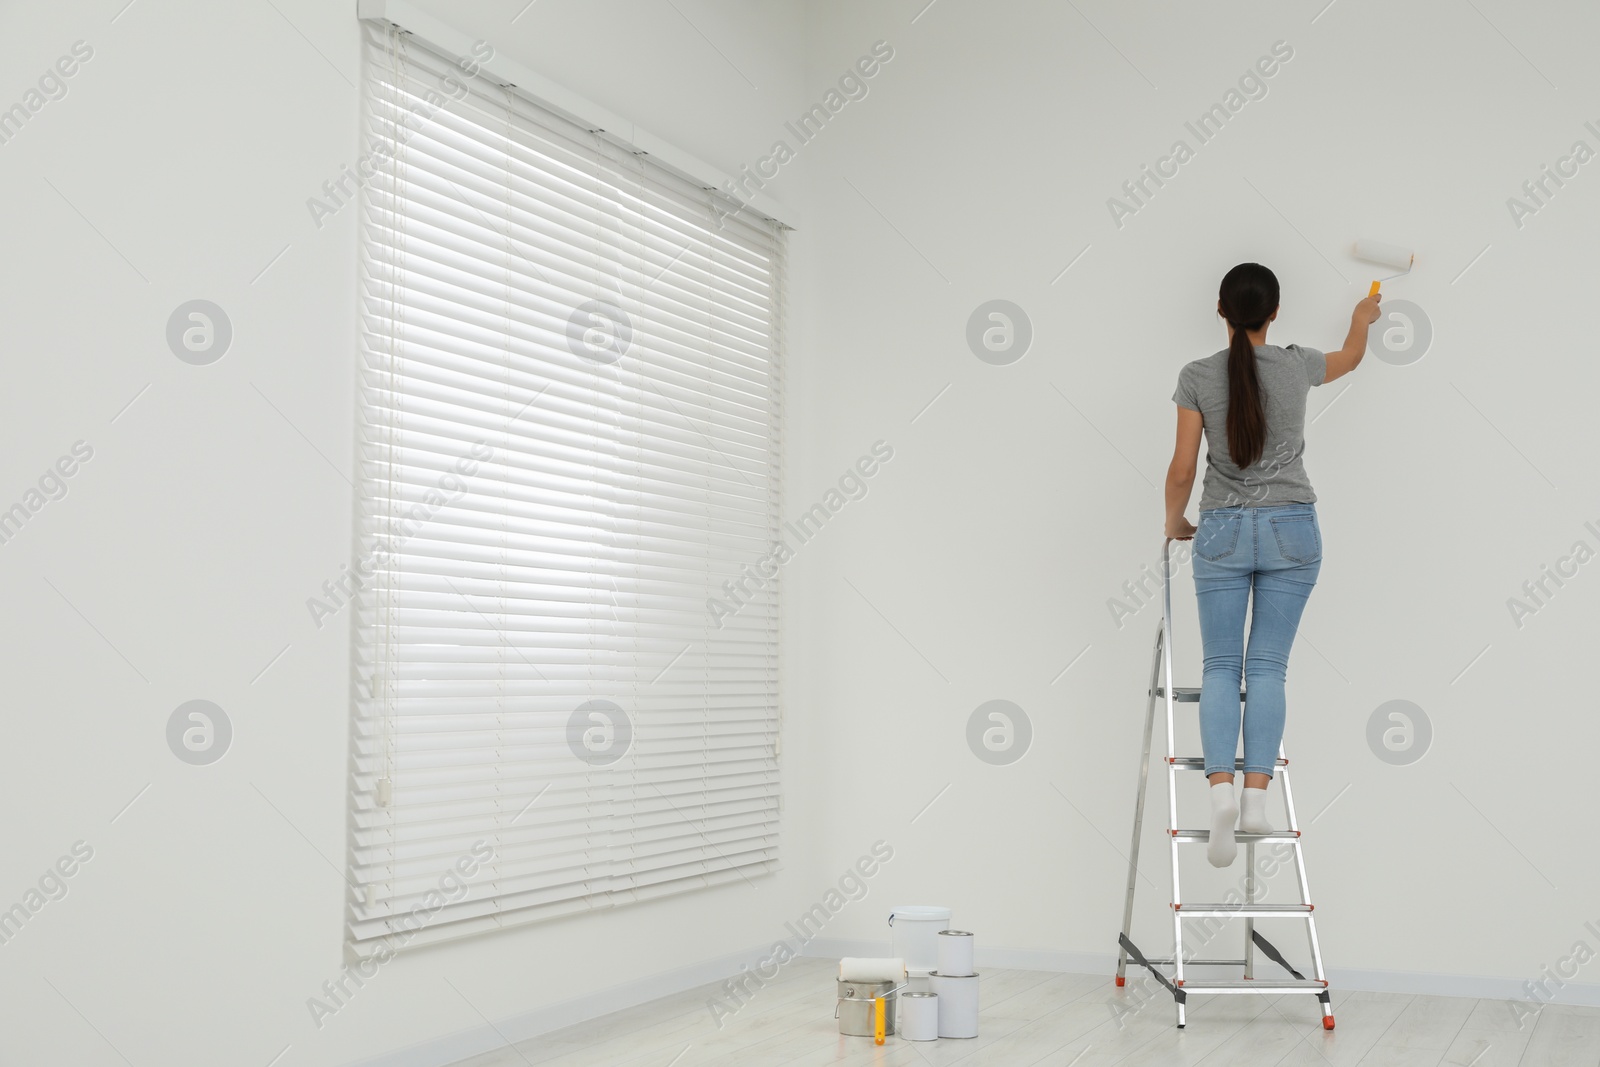 Photo of Woman standing on metallic folding ladder and painting wall indoors, space for text